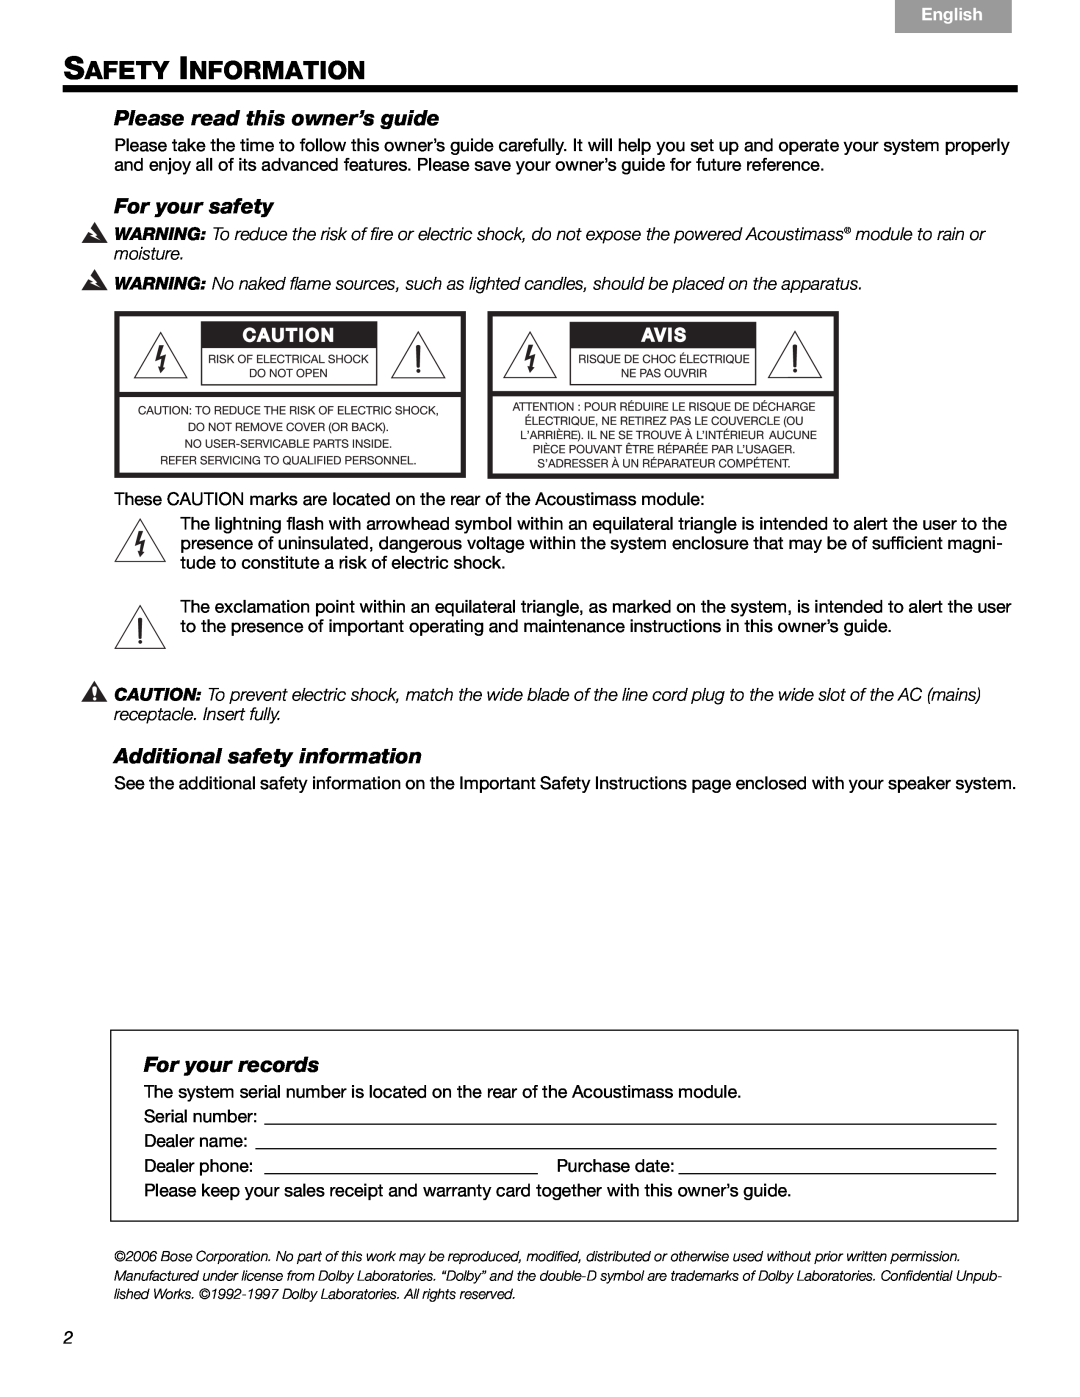 Bose 16, 15 Safety Information, Please read this owner’s guide, For your safety, Additional safety information, English 